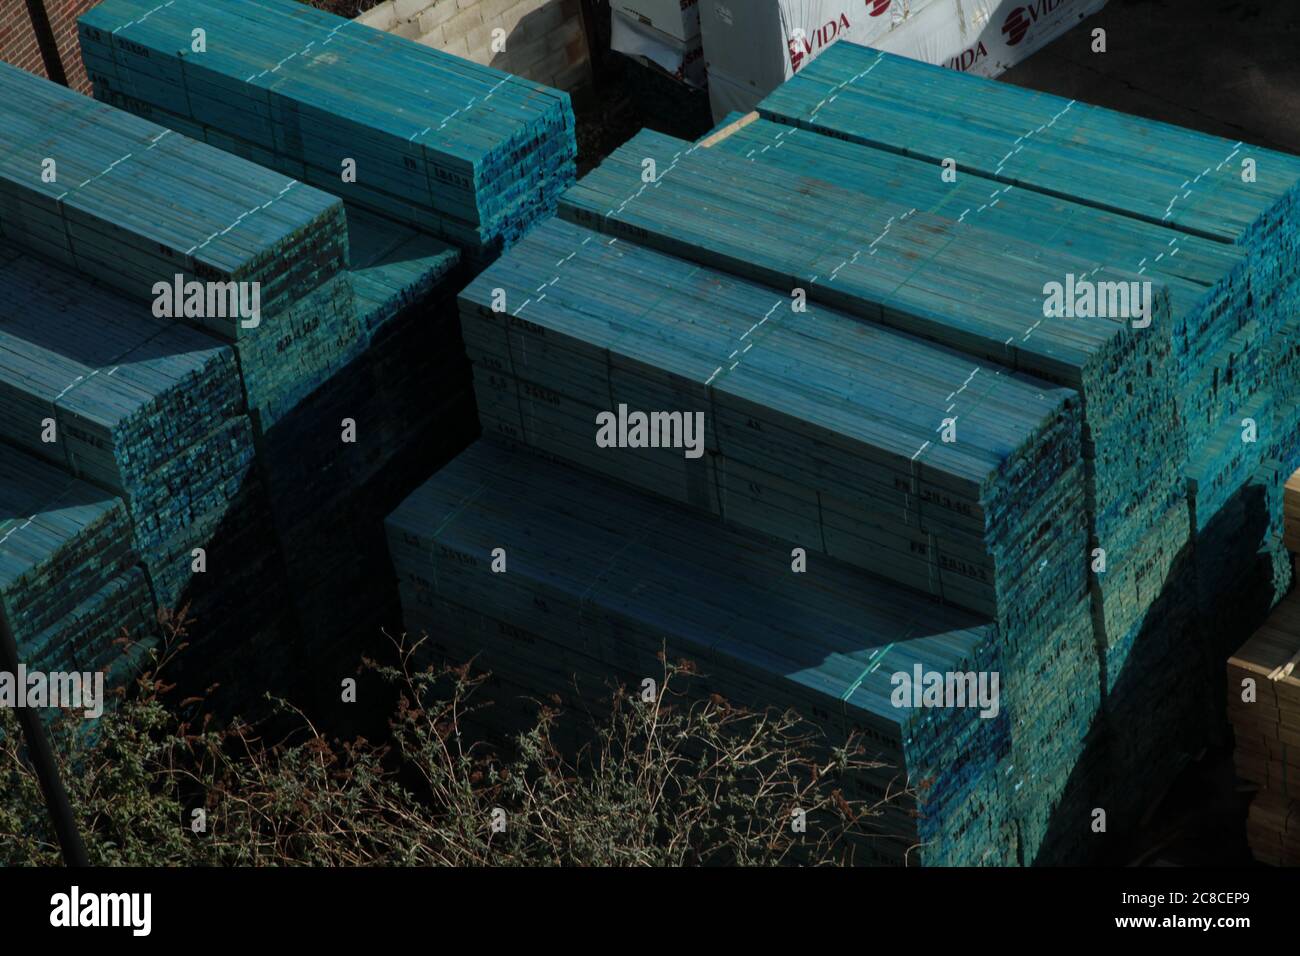 Timber yard with packs of dimensioned softwood from Sweden Stock Photo